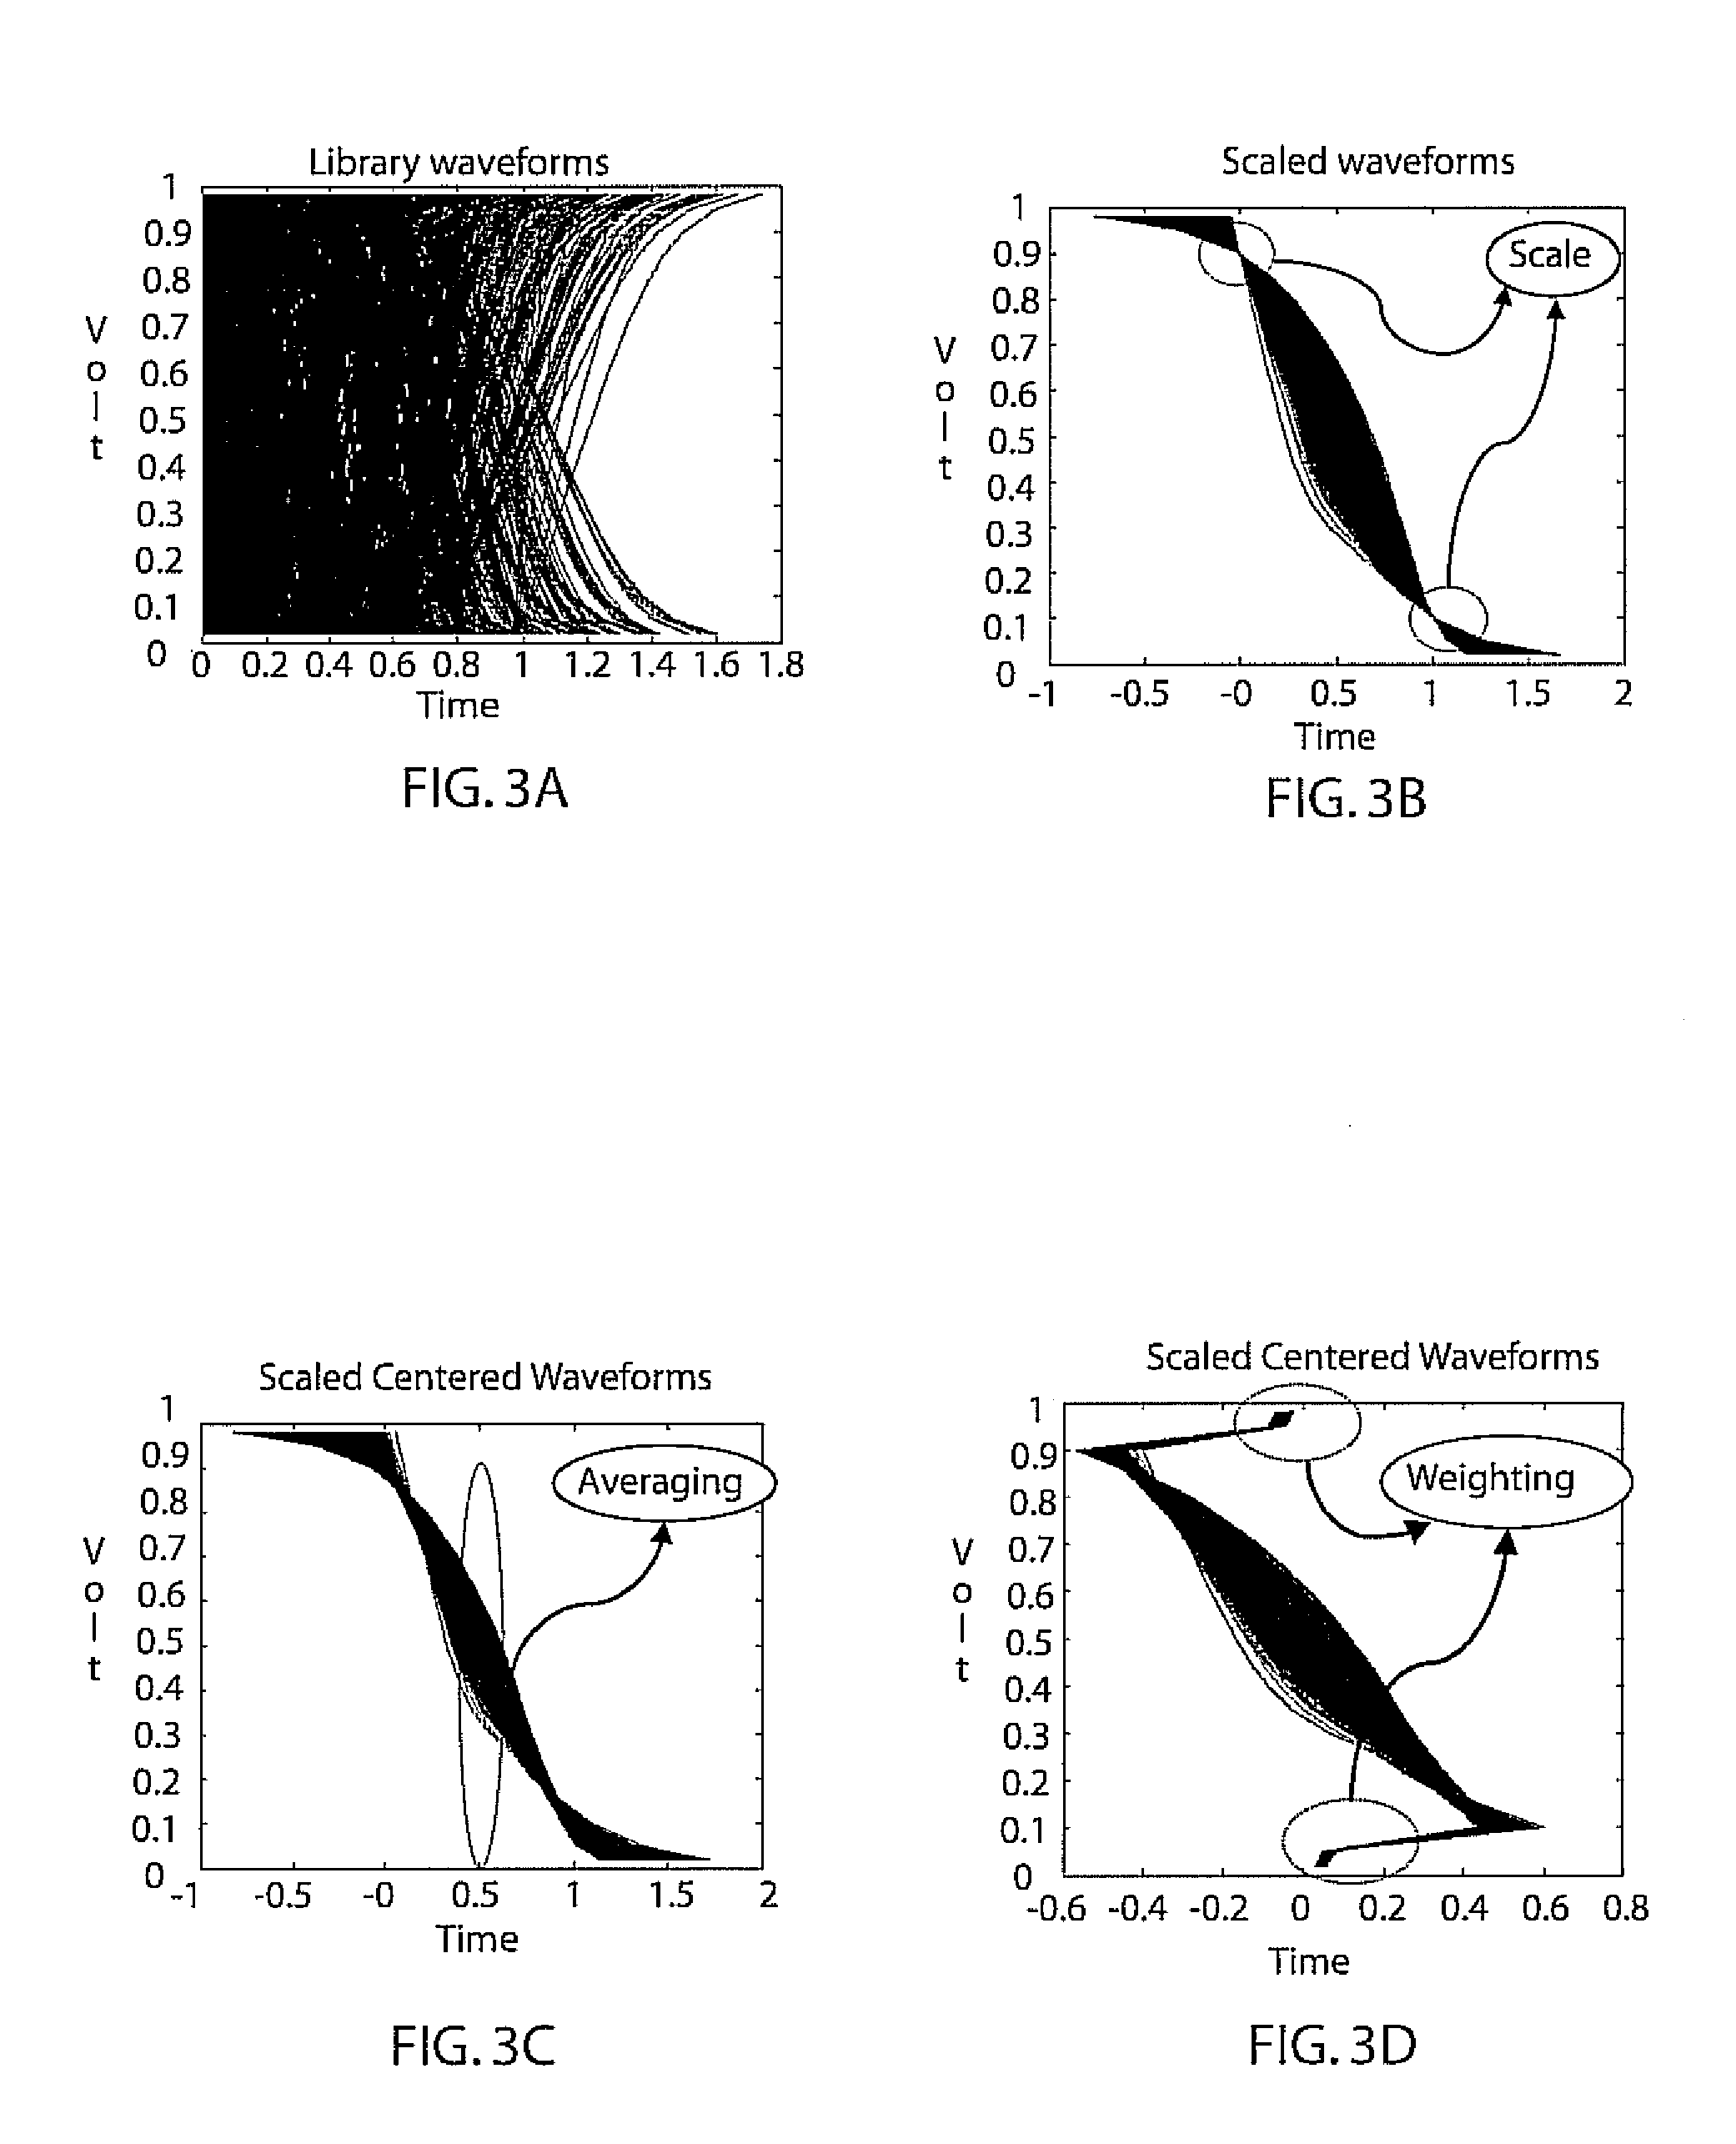 Efficient compression and handling of model library waveforms